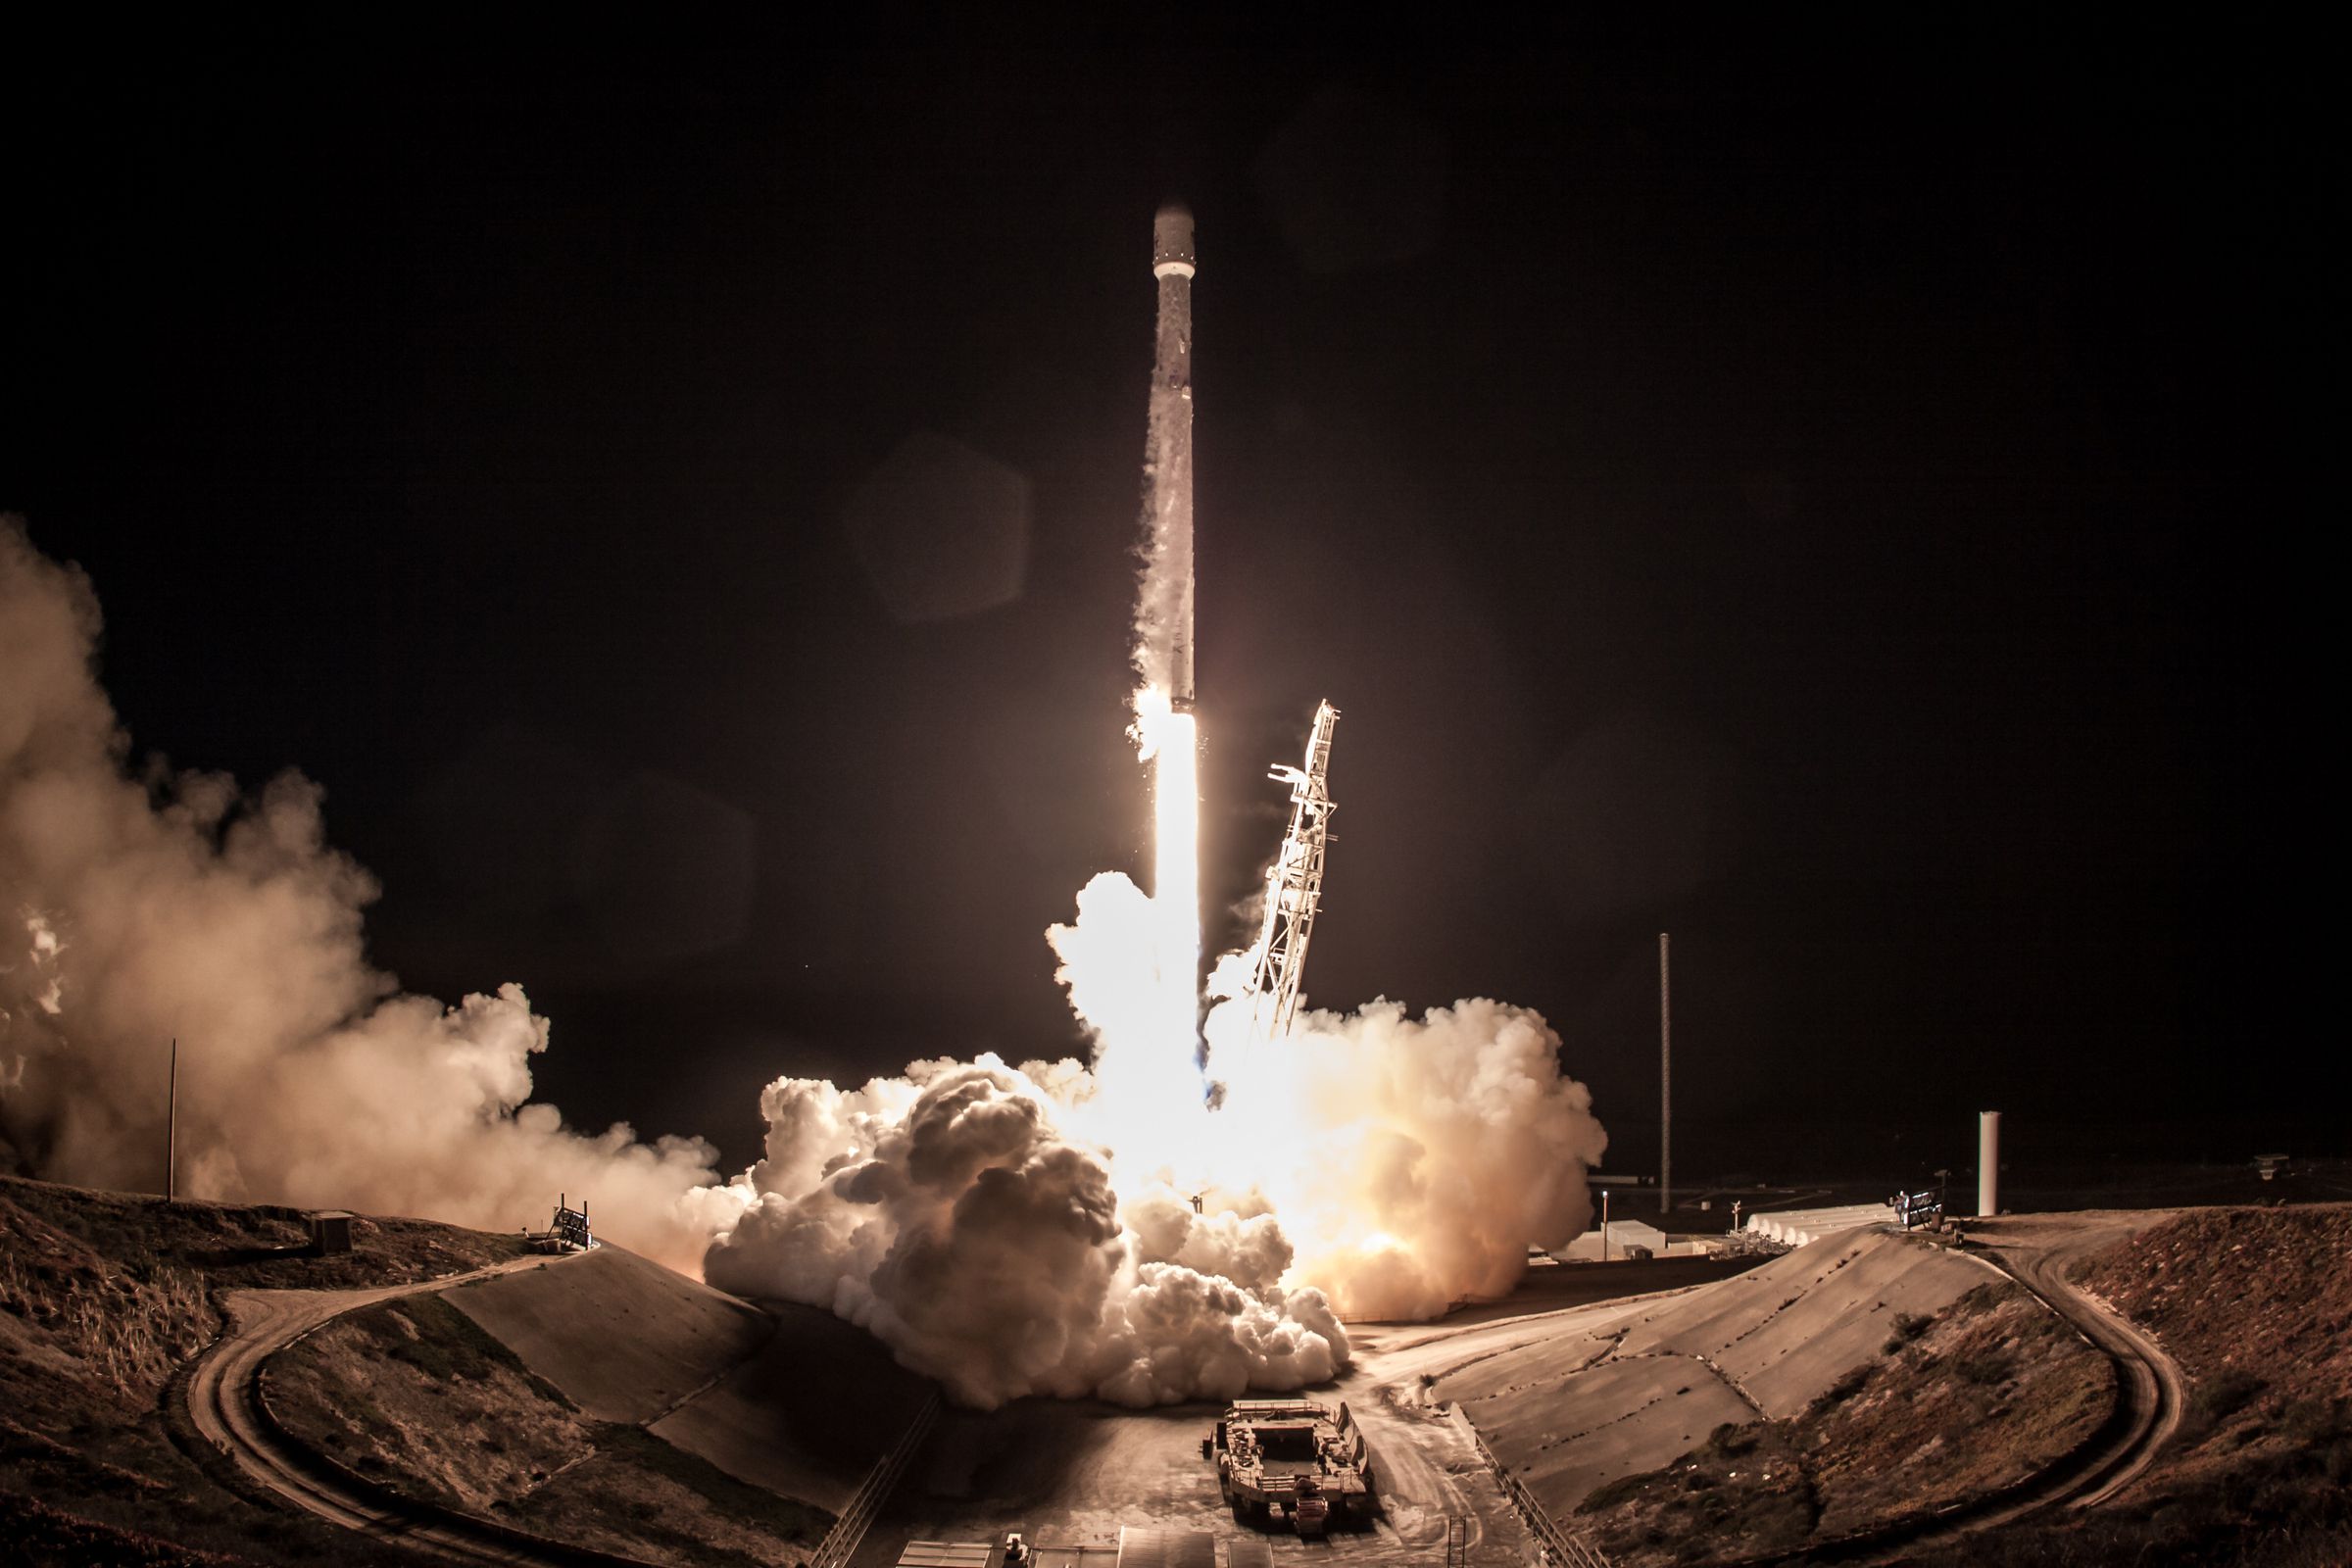 A SpaceX Falcon 9 rocket launching from Vandenberg Air Force Base in California